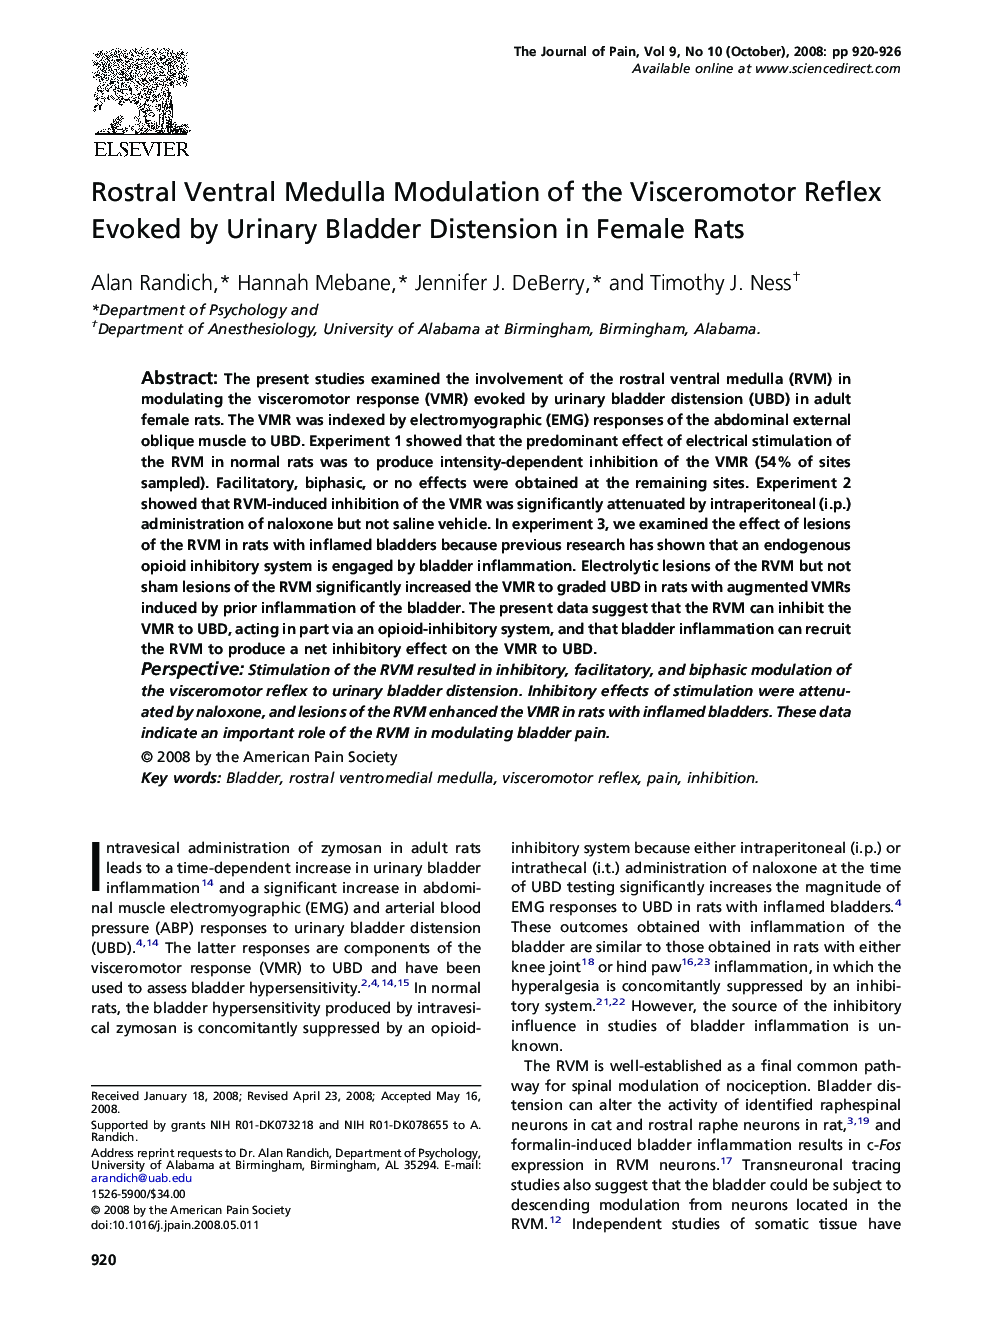 Rostral Ventral Medulla Modulation of the Visceromotor Reflex Evoked by Urinary Bladder Distension in Female Rats 